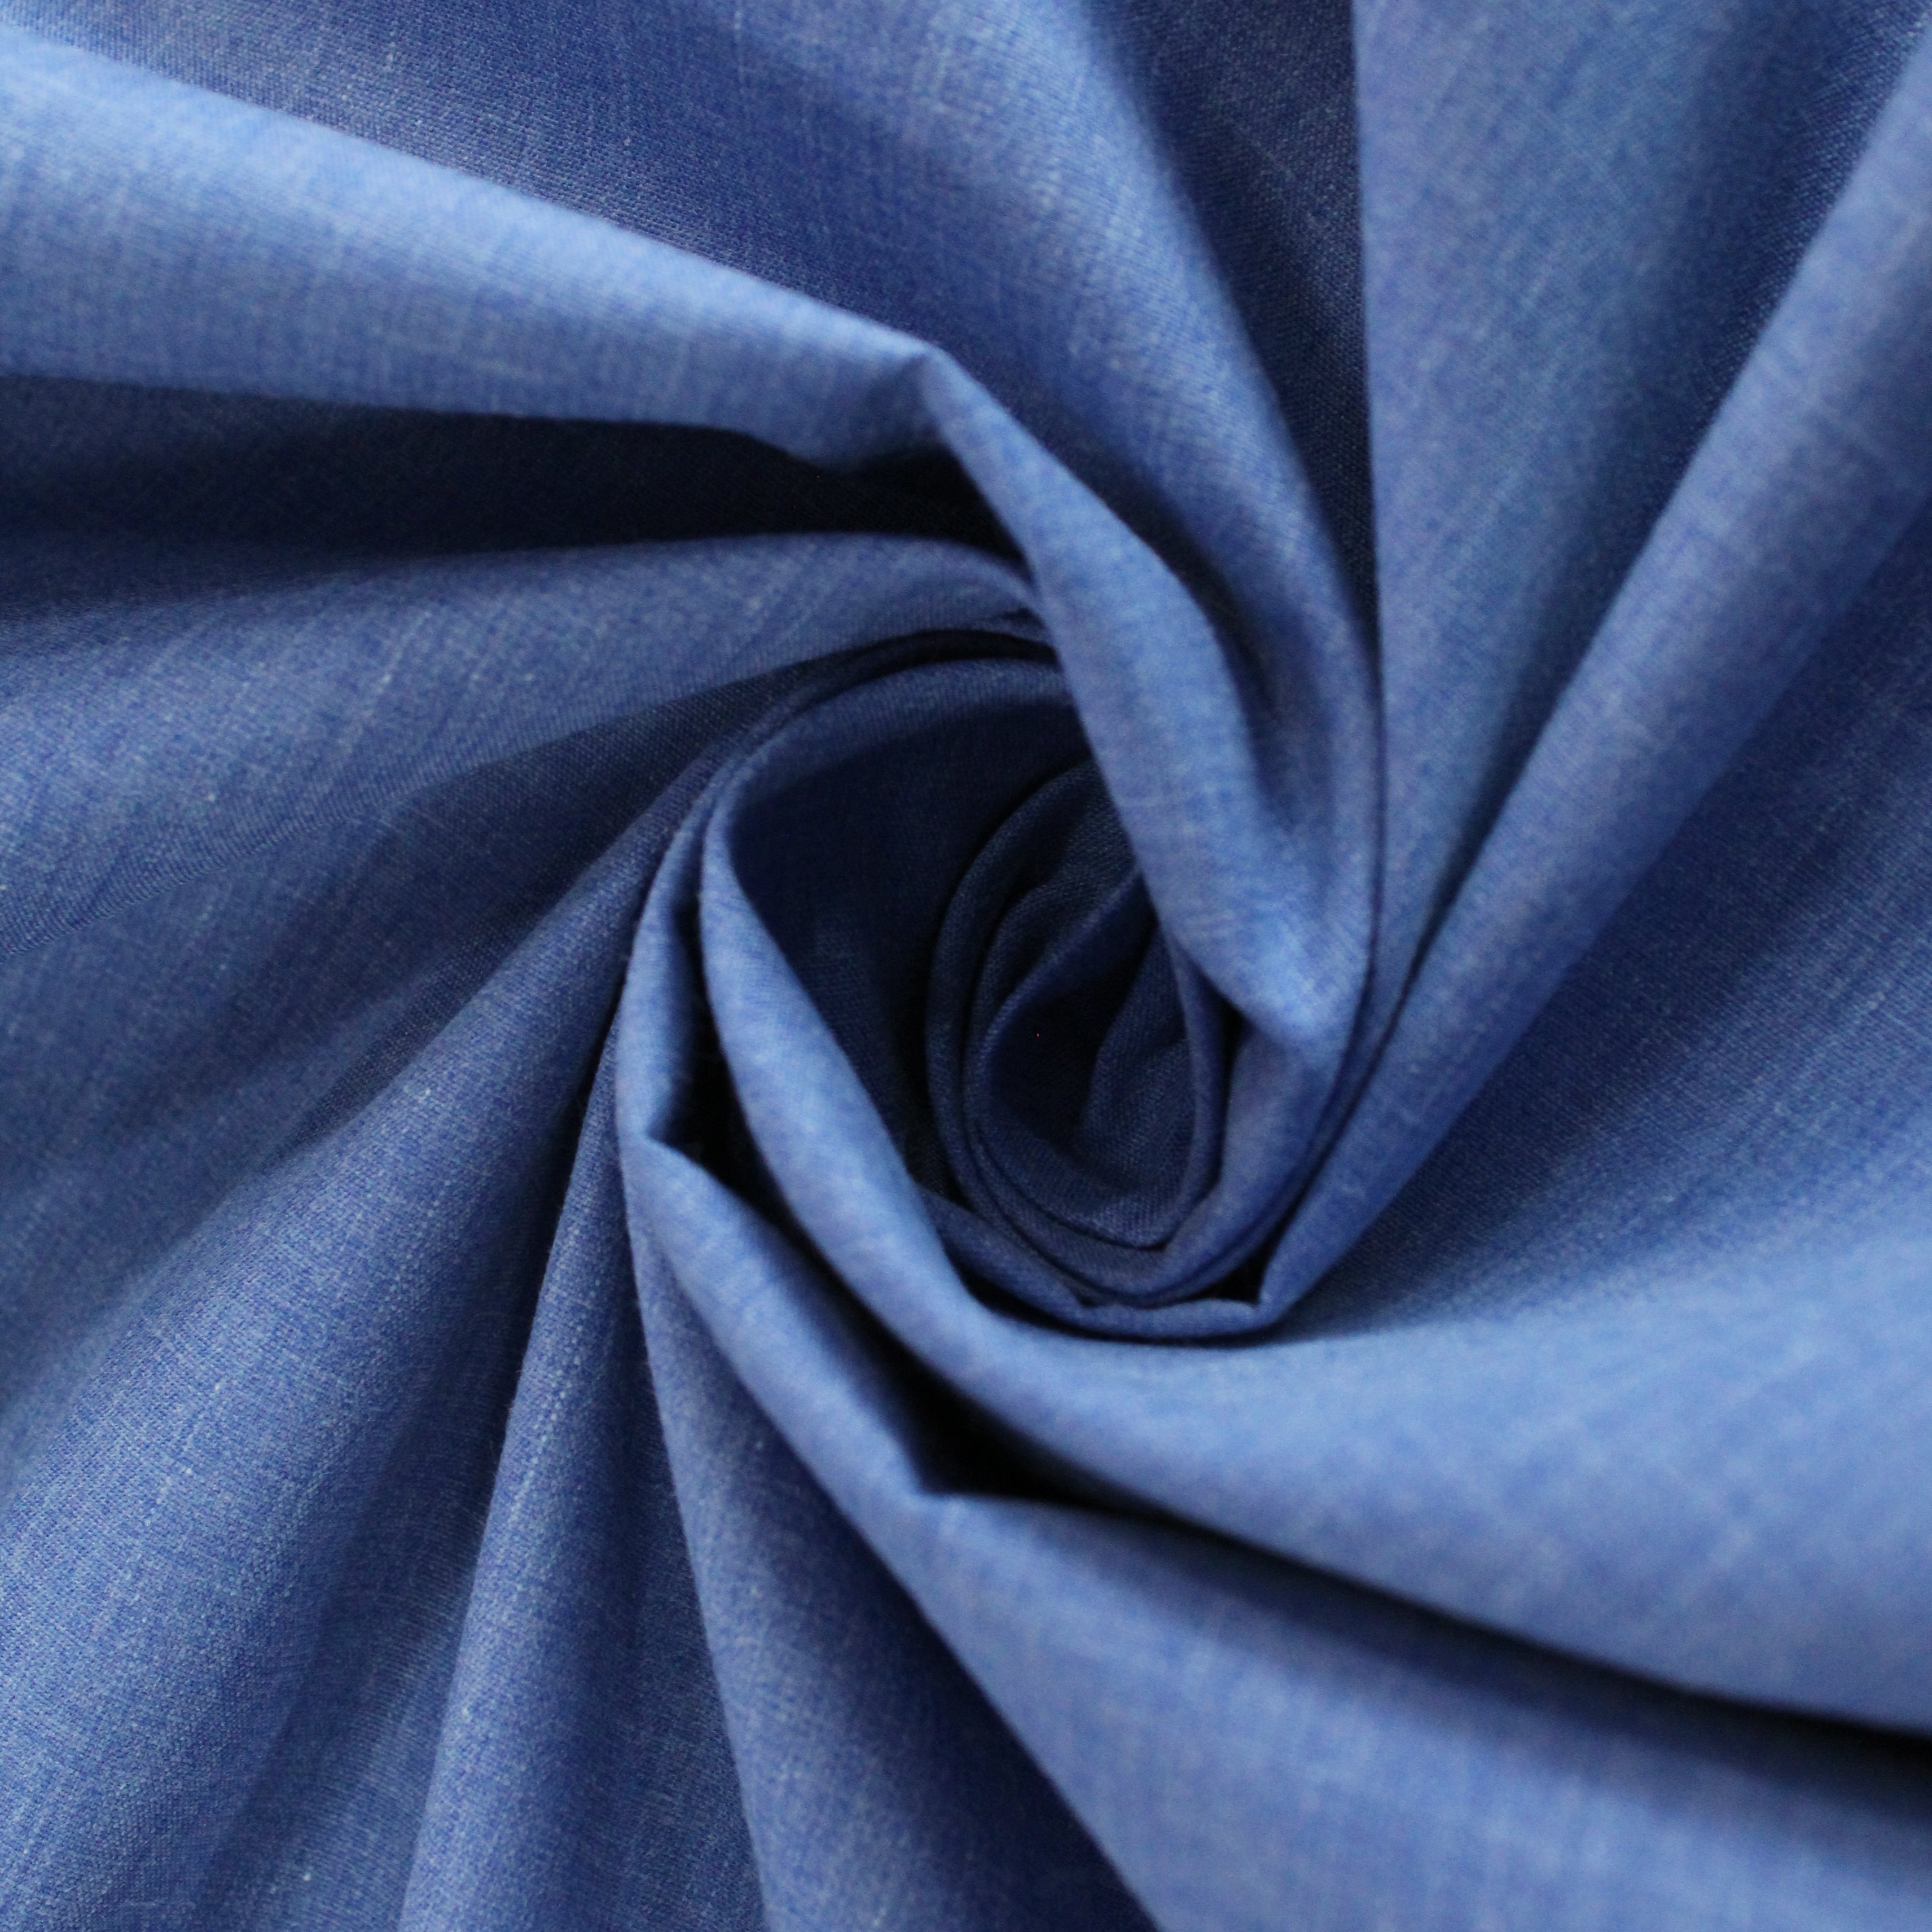 3 Metres For £5, Premium Plain Polycotton Fabric, 60° Washable, 45" Wide, Variations Available